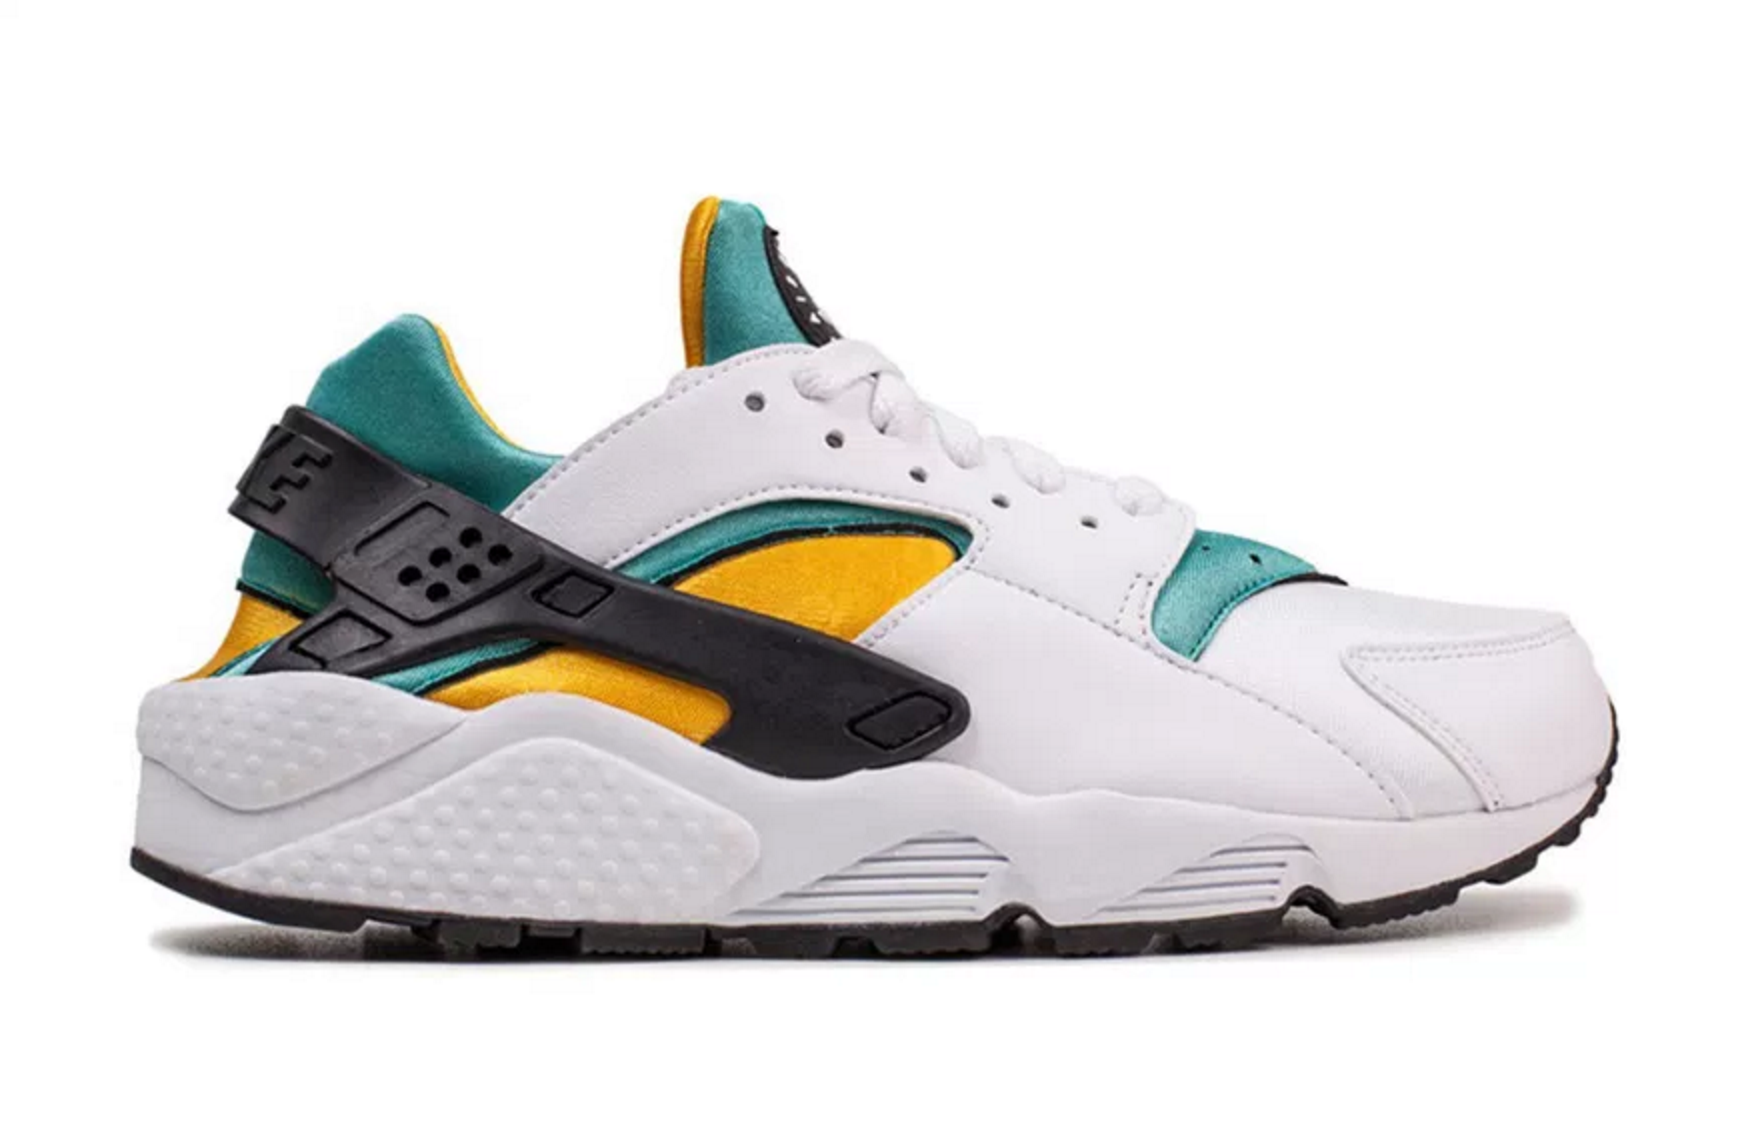 NIKE AIR OG SPORT TURQUOISE - dropcents